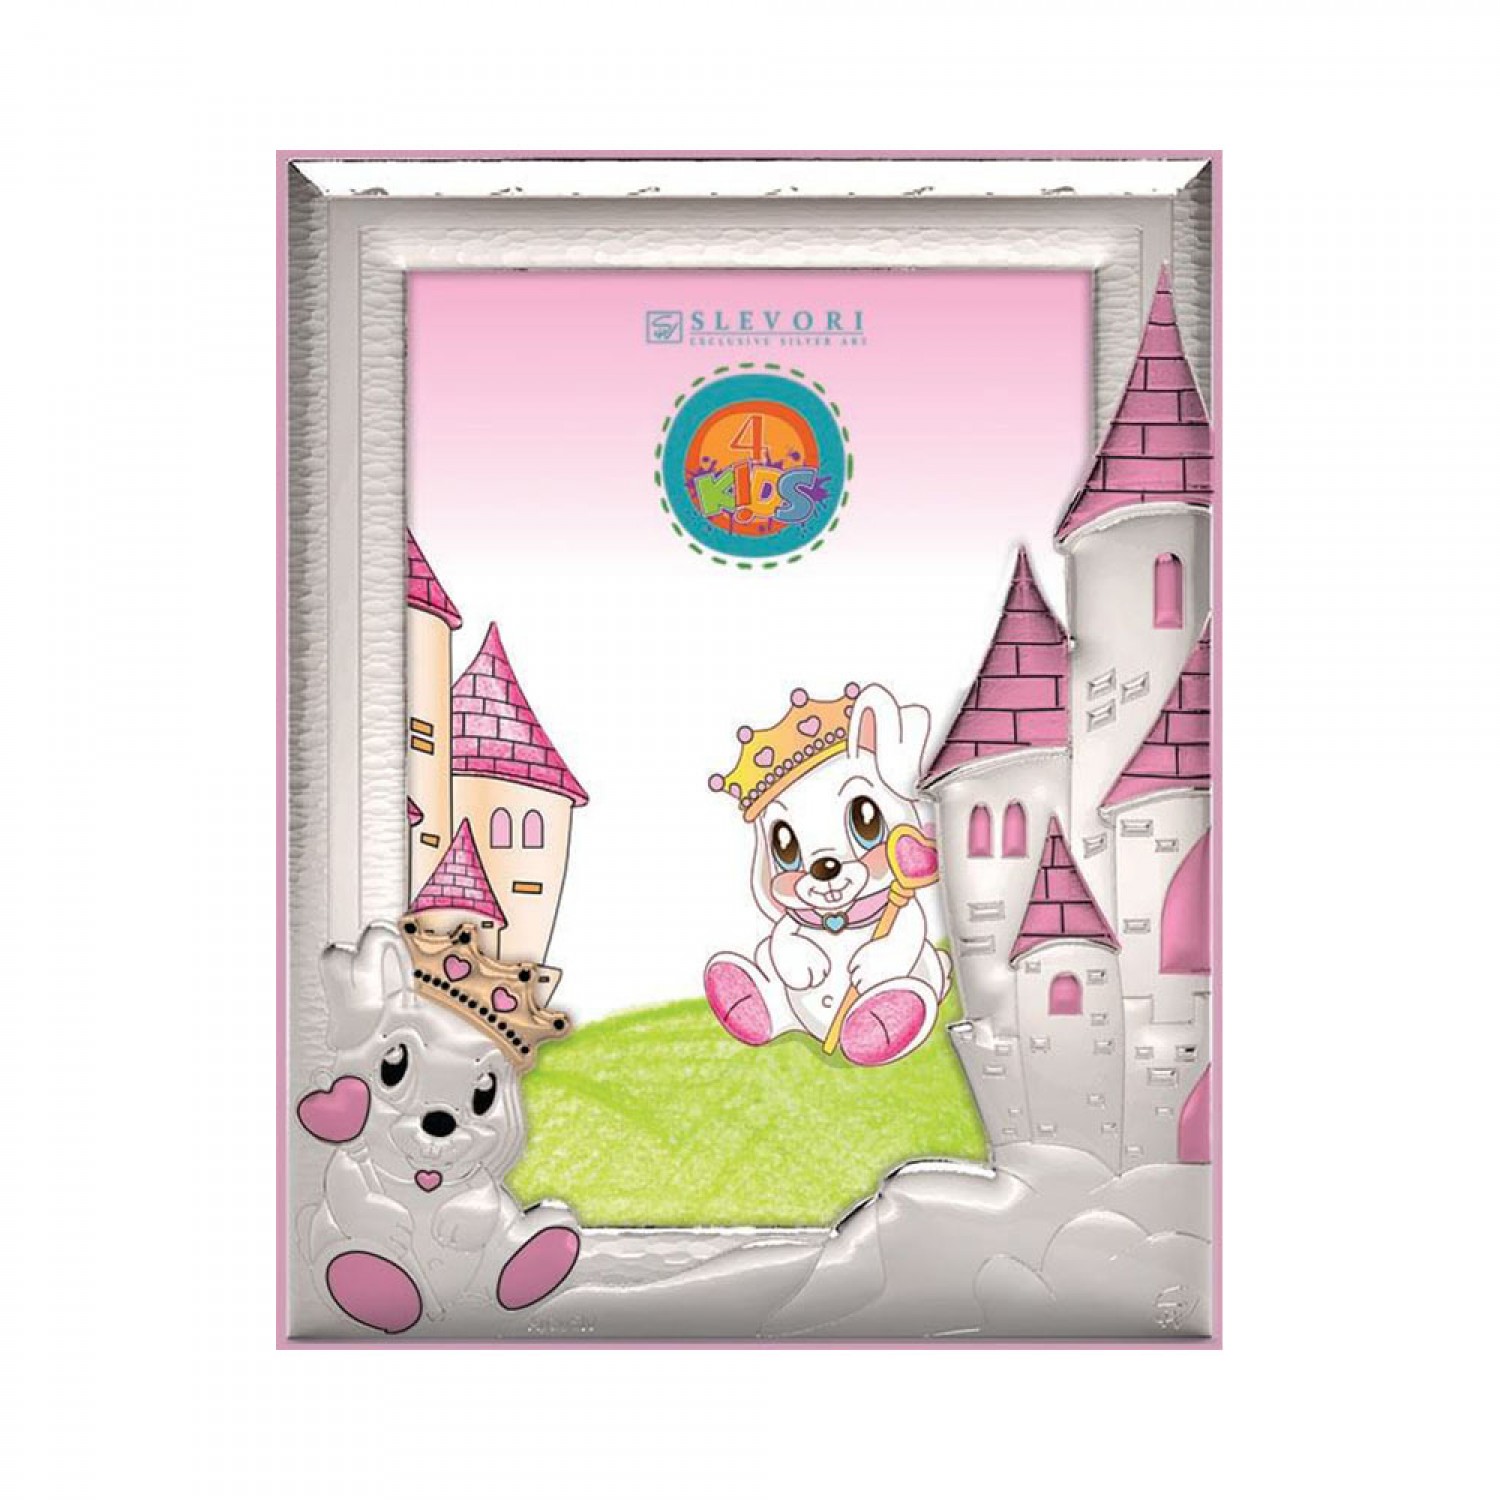 Childrens frame for little girl with teddy bear and castle 13X18.